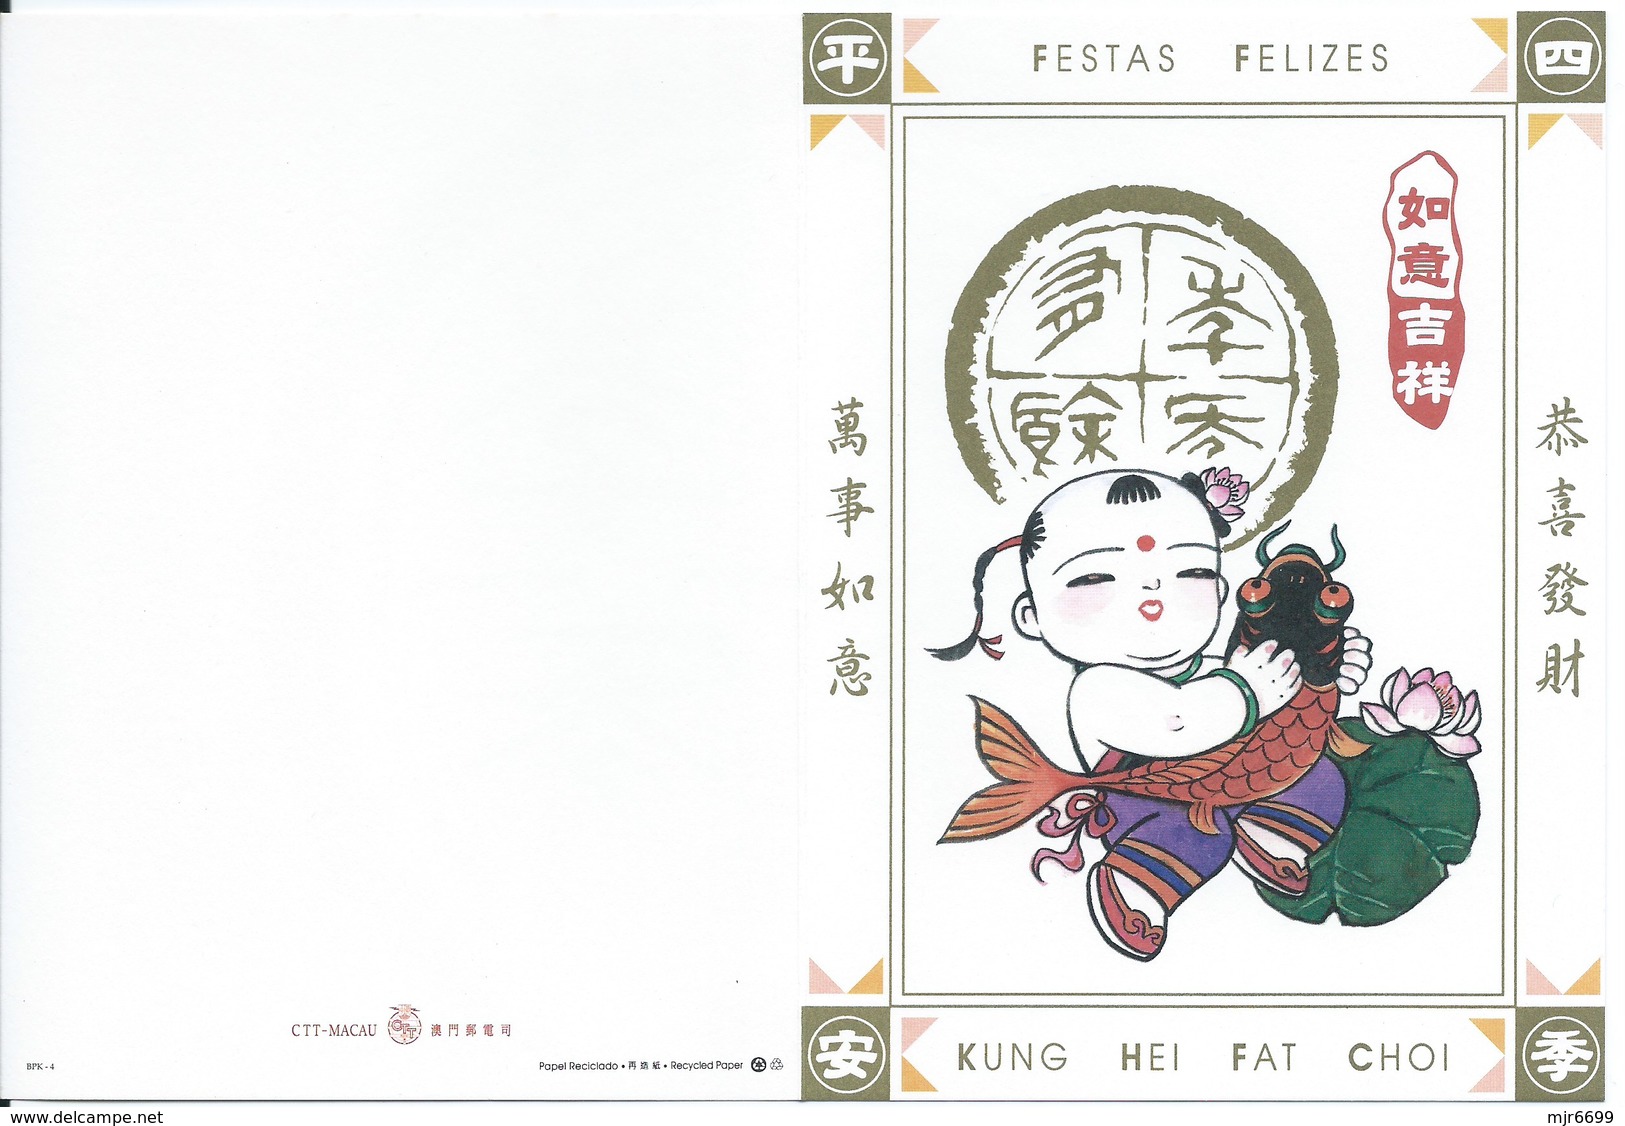 MACAU 1998 NEW YEAR GREETING CARD & POSTAGE PAID COVER, POST OFFICE CODE #BPK004 - Ganzsachen